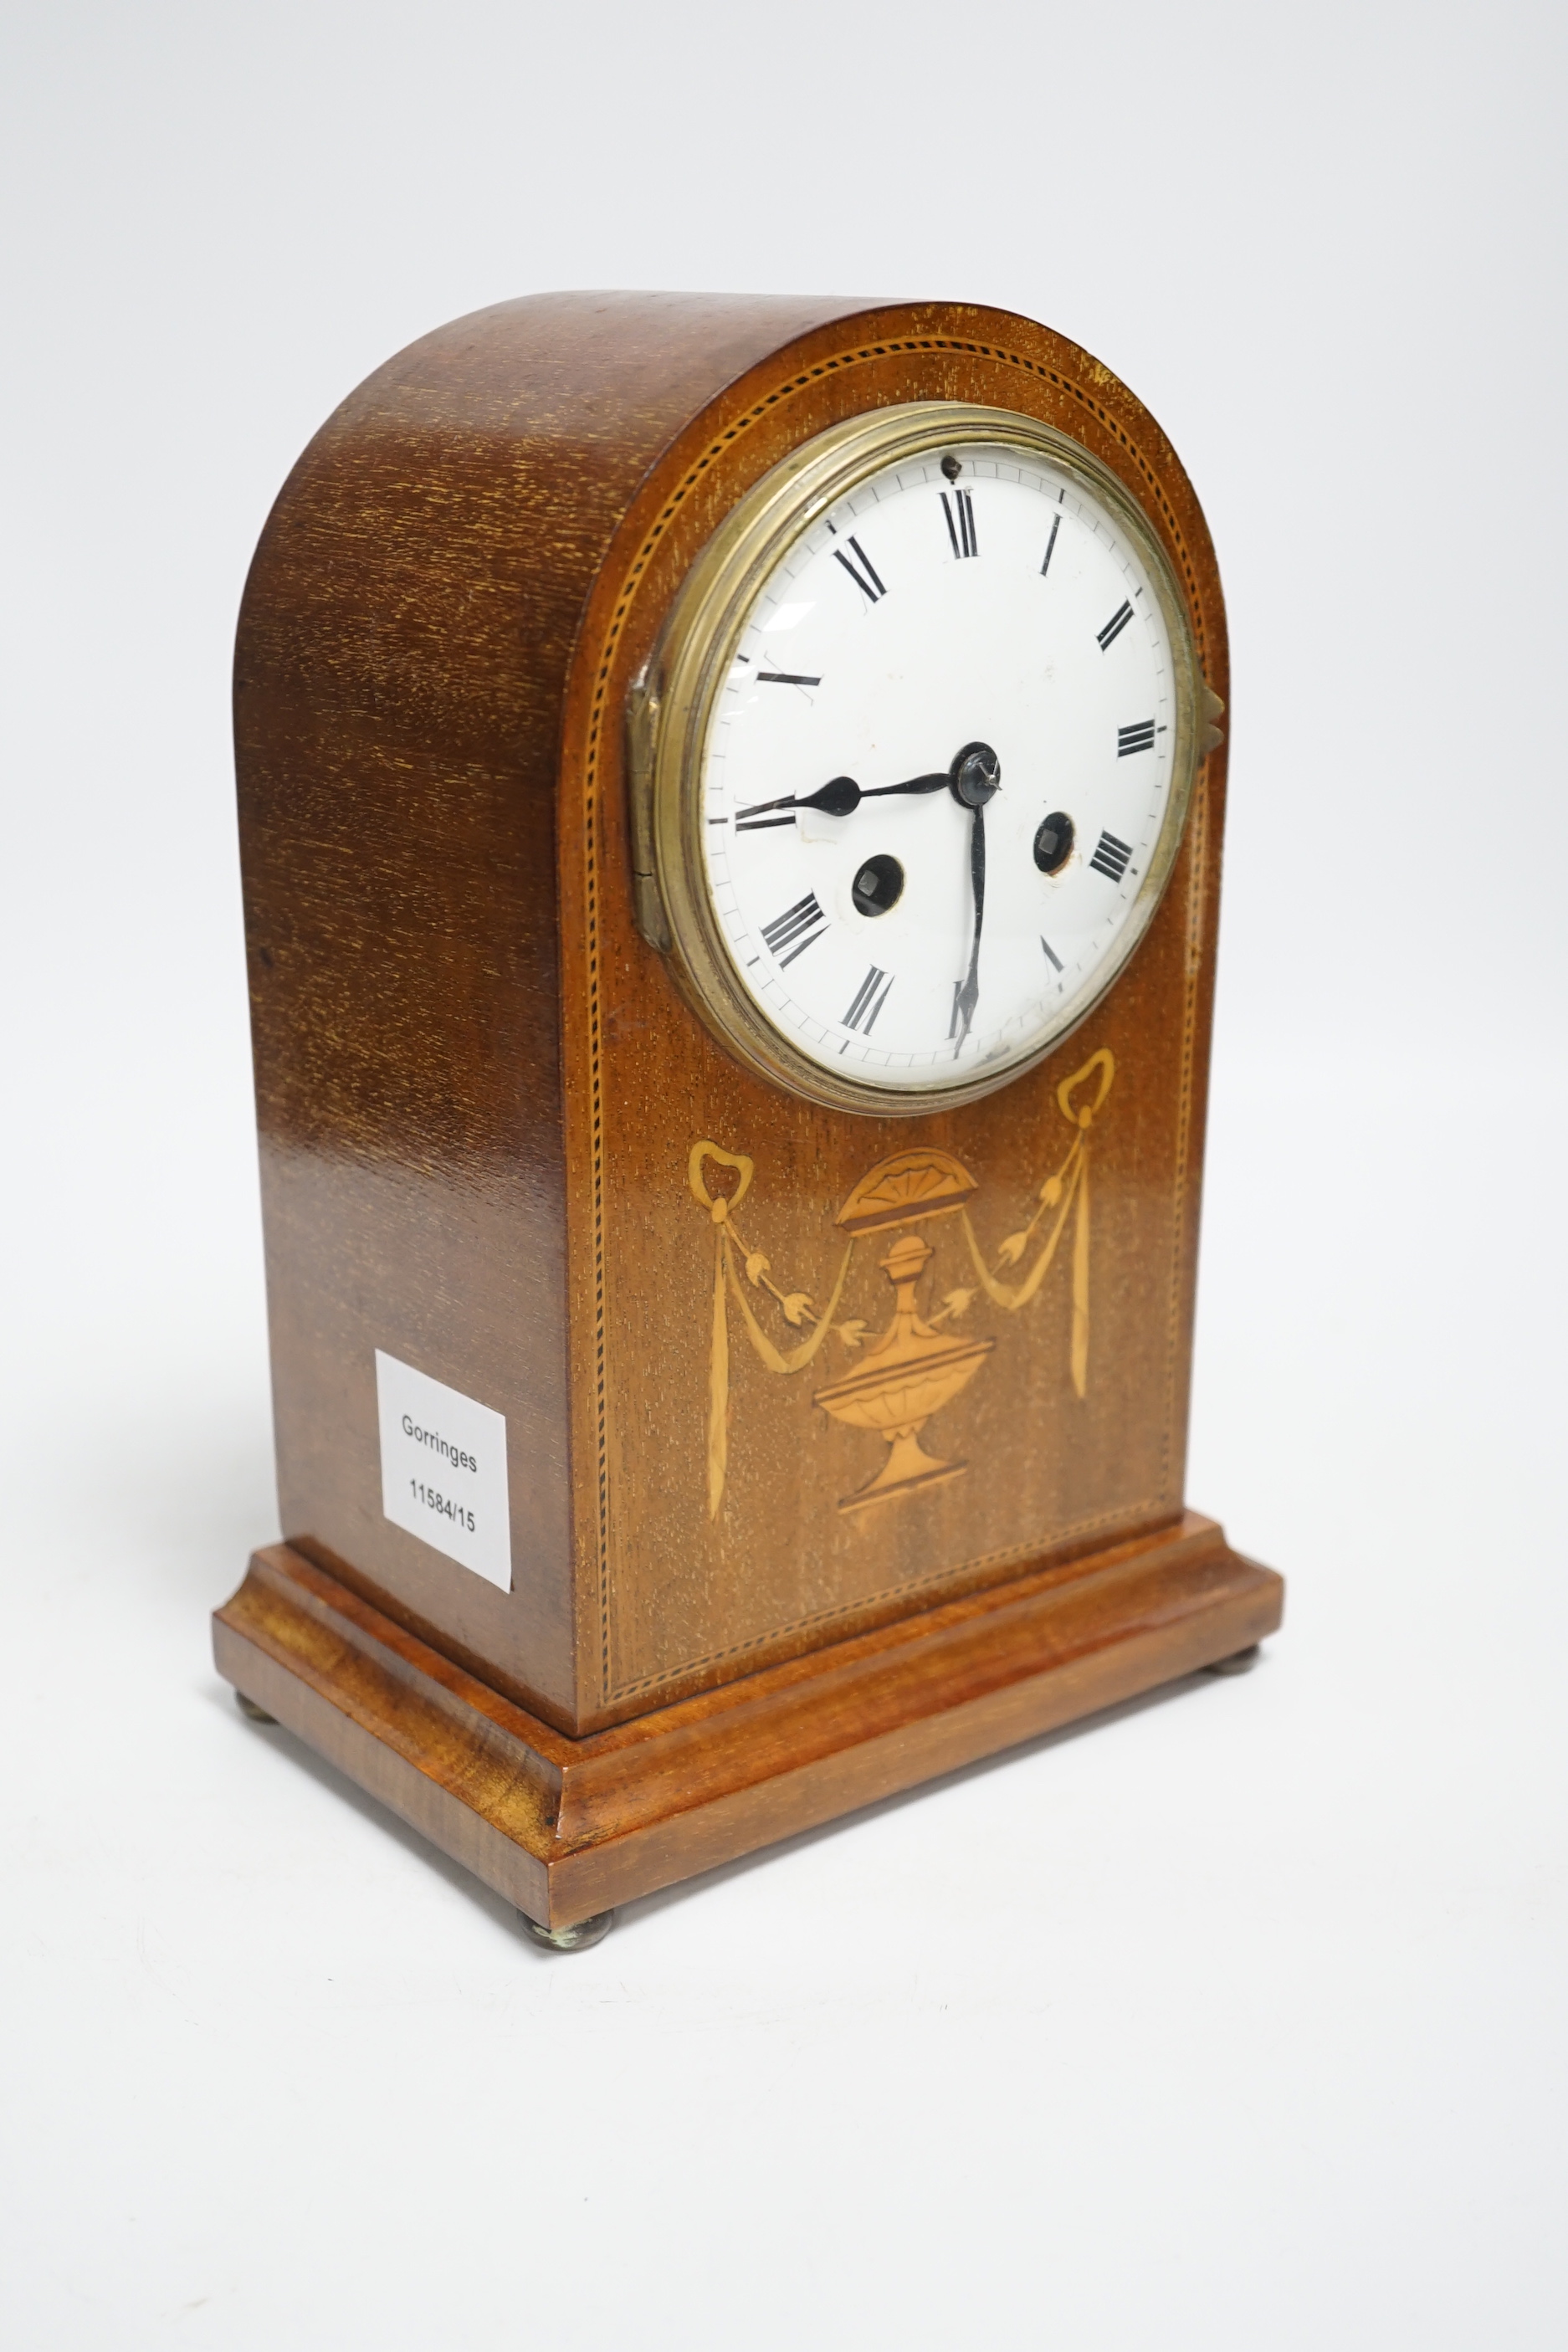 An Edwardian marquetry mantel clock with enamel dial, the case inlaid with swags, 26cm high